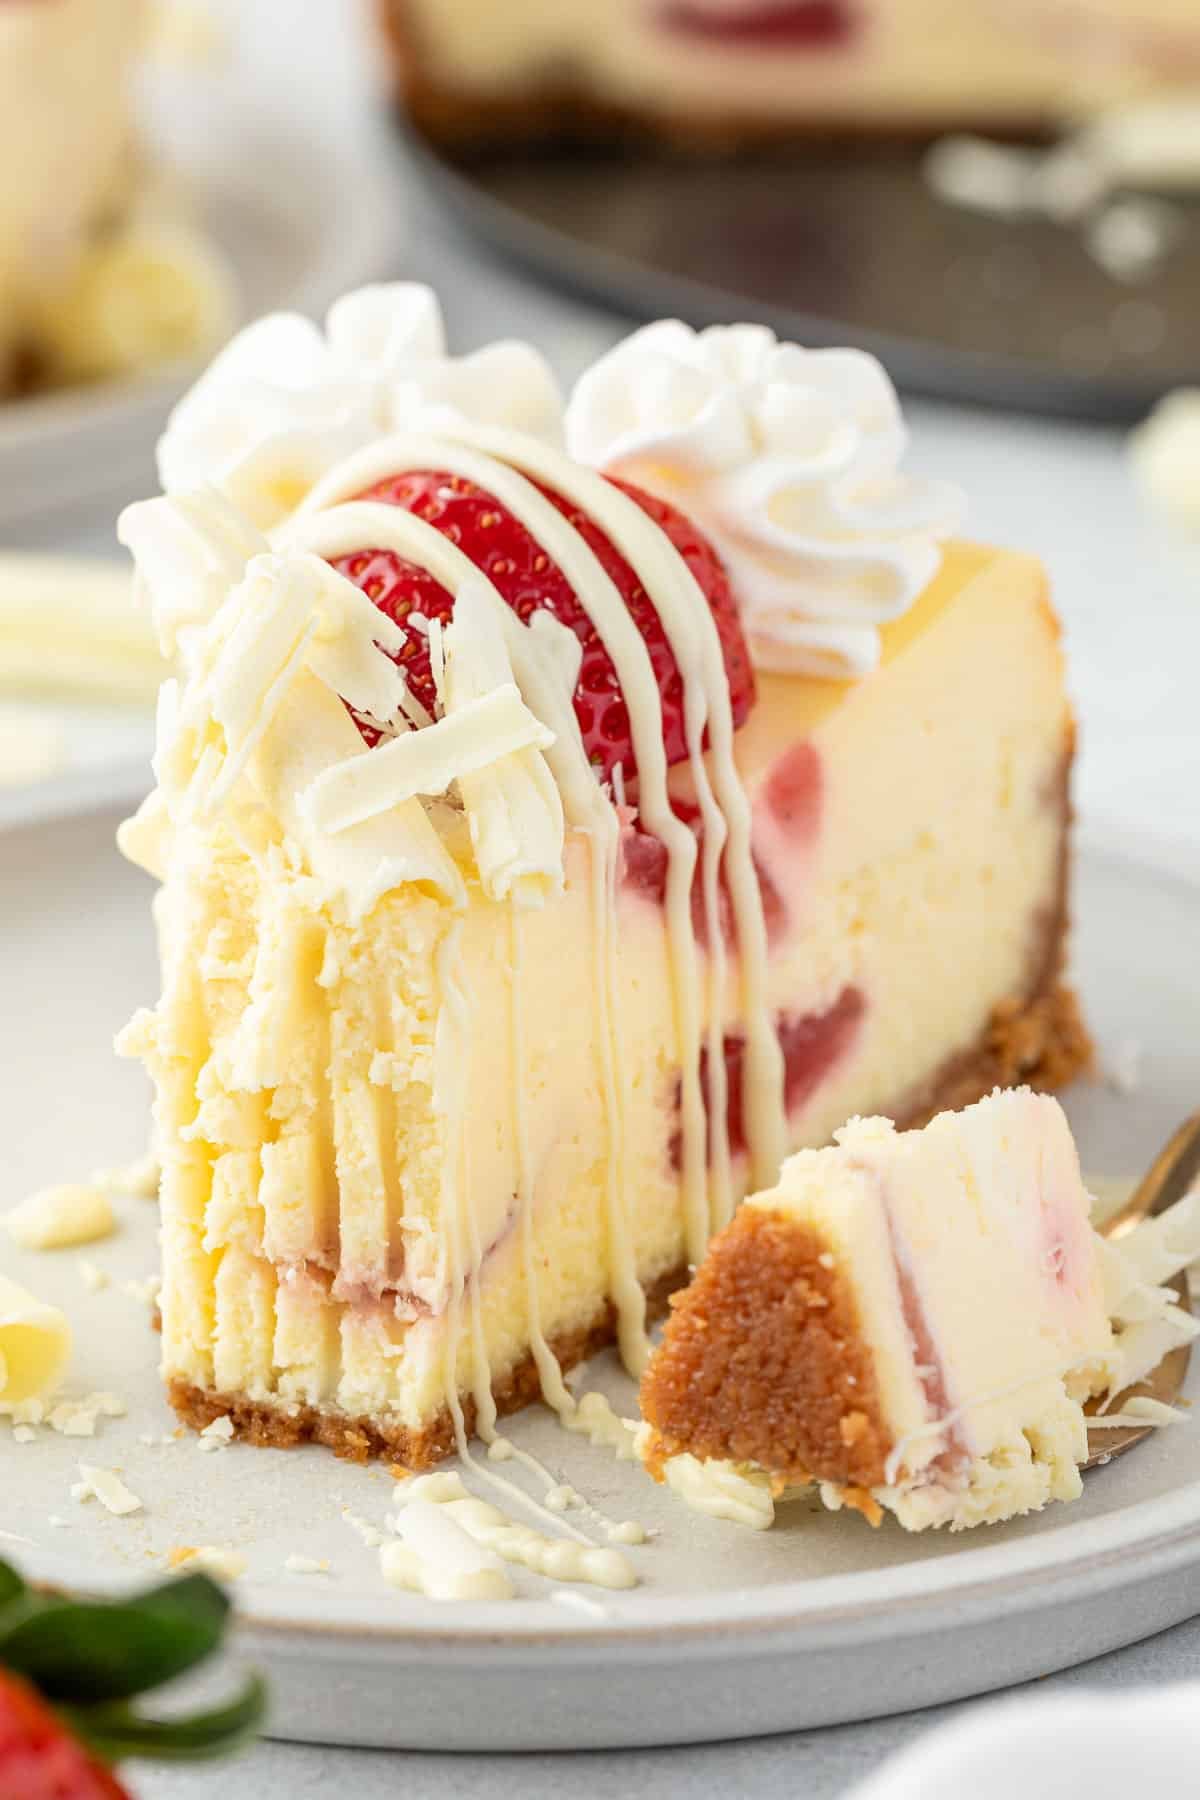 A slice of strawberry white chocolate cheesecake with a bite missing, topped with fresh strawberries and a drizzle of chocolate sauce.